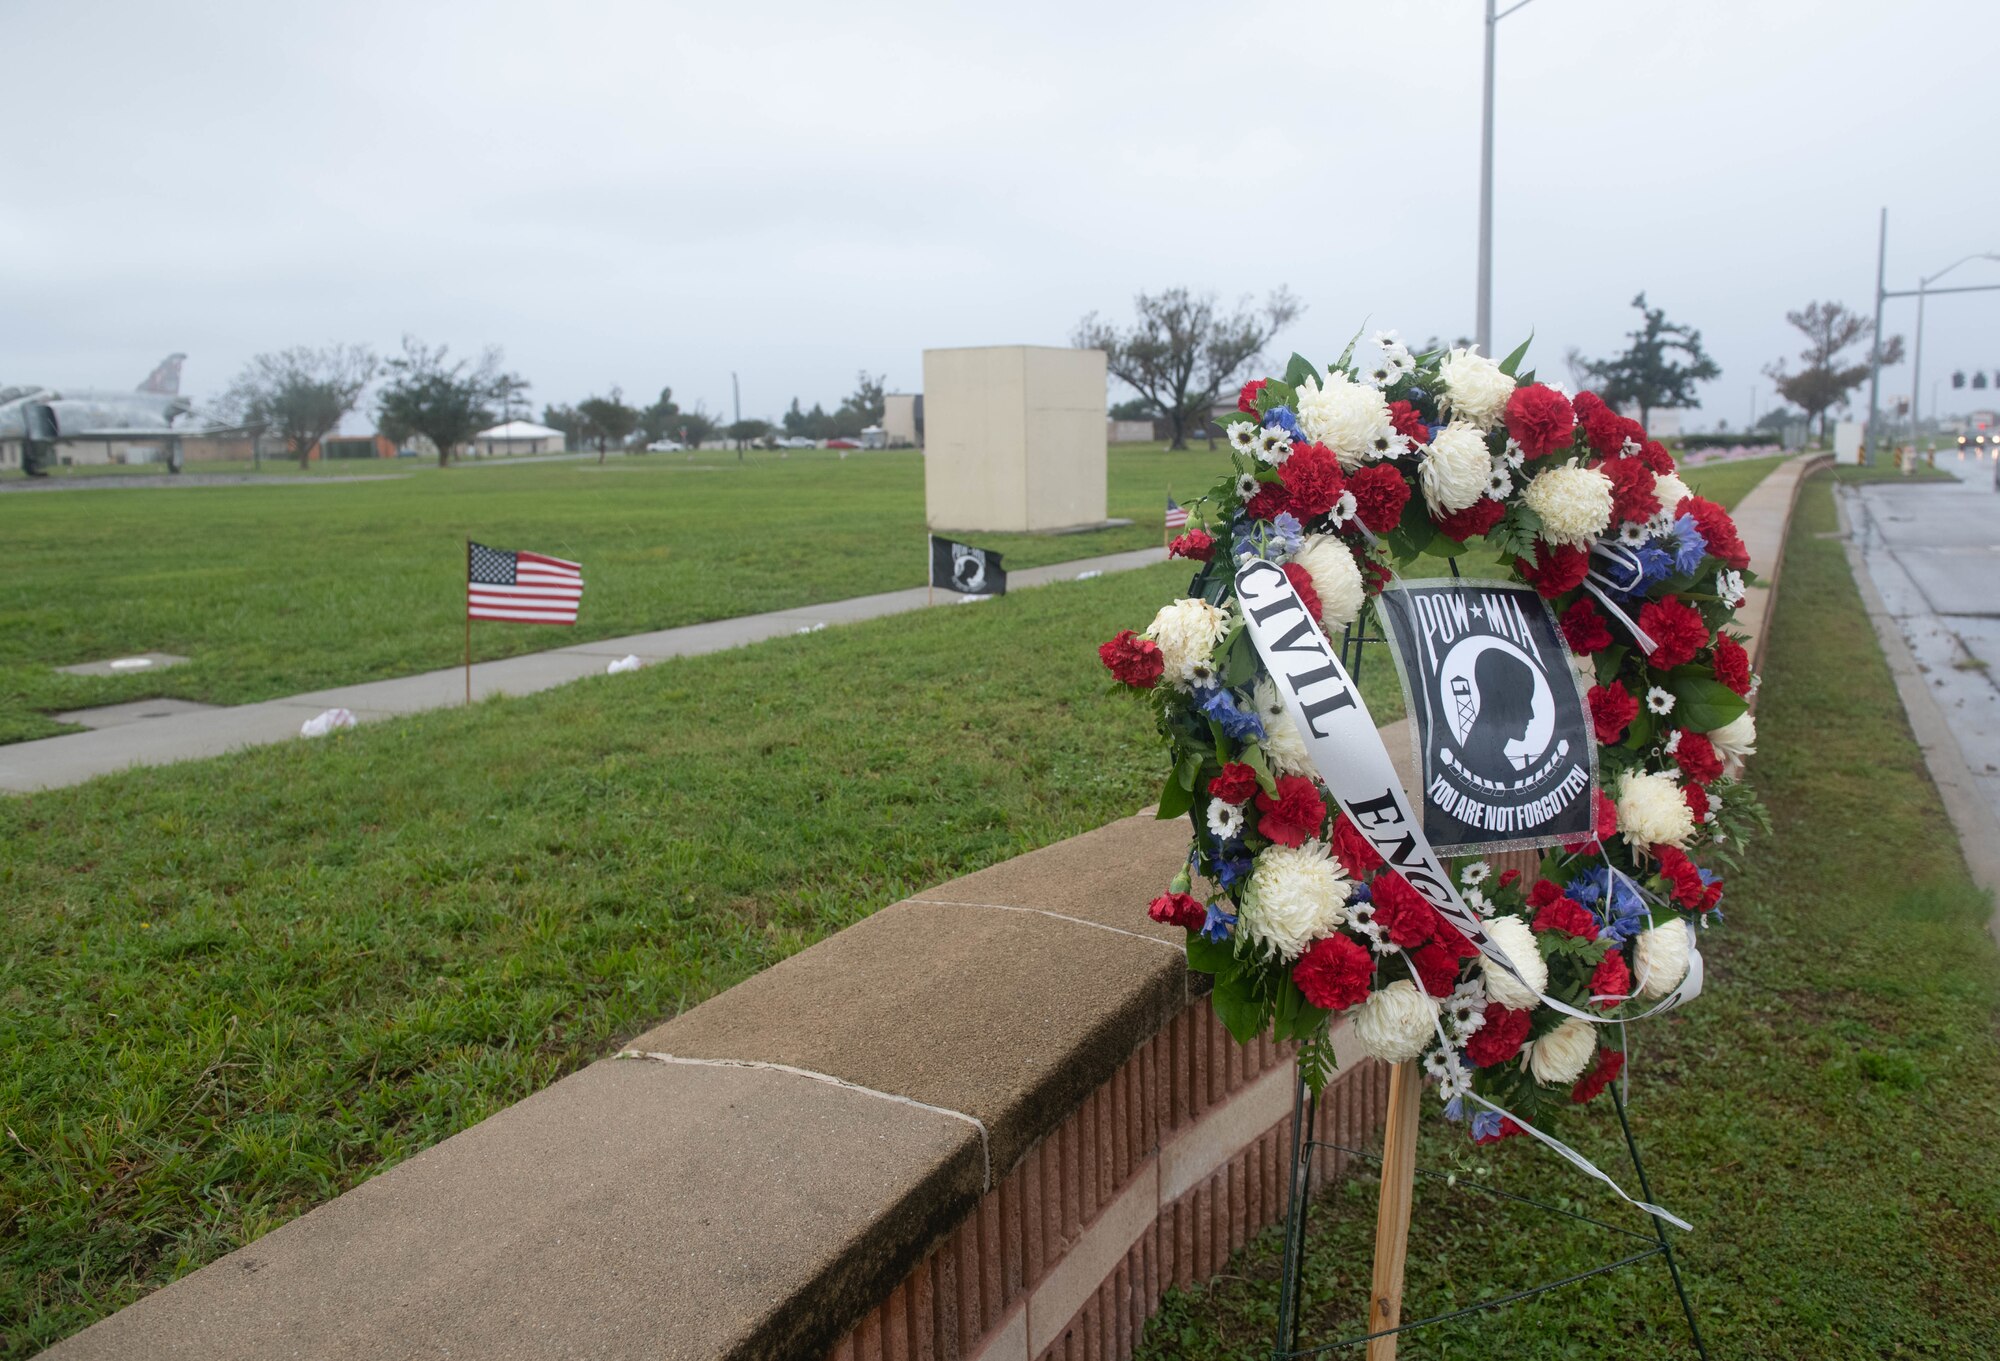 A decorated wreath is displayed at Flag Park at Tyndall Air Force Base, Florida, Sept. 24, 2020. The wreath was one of many lined up to honor prisoners of war and those missing in action. (U.S. Air Force photo by Airman Anabel Del Valle)